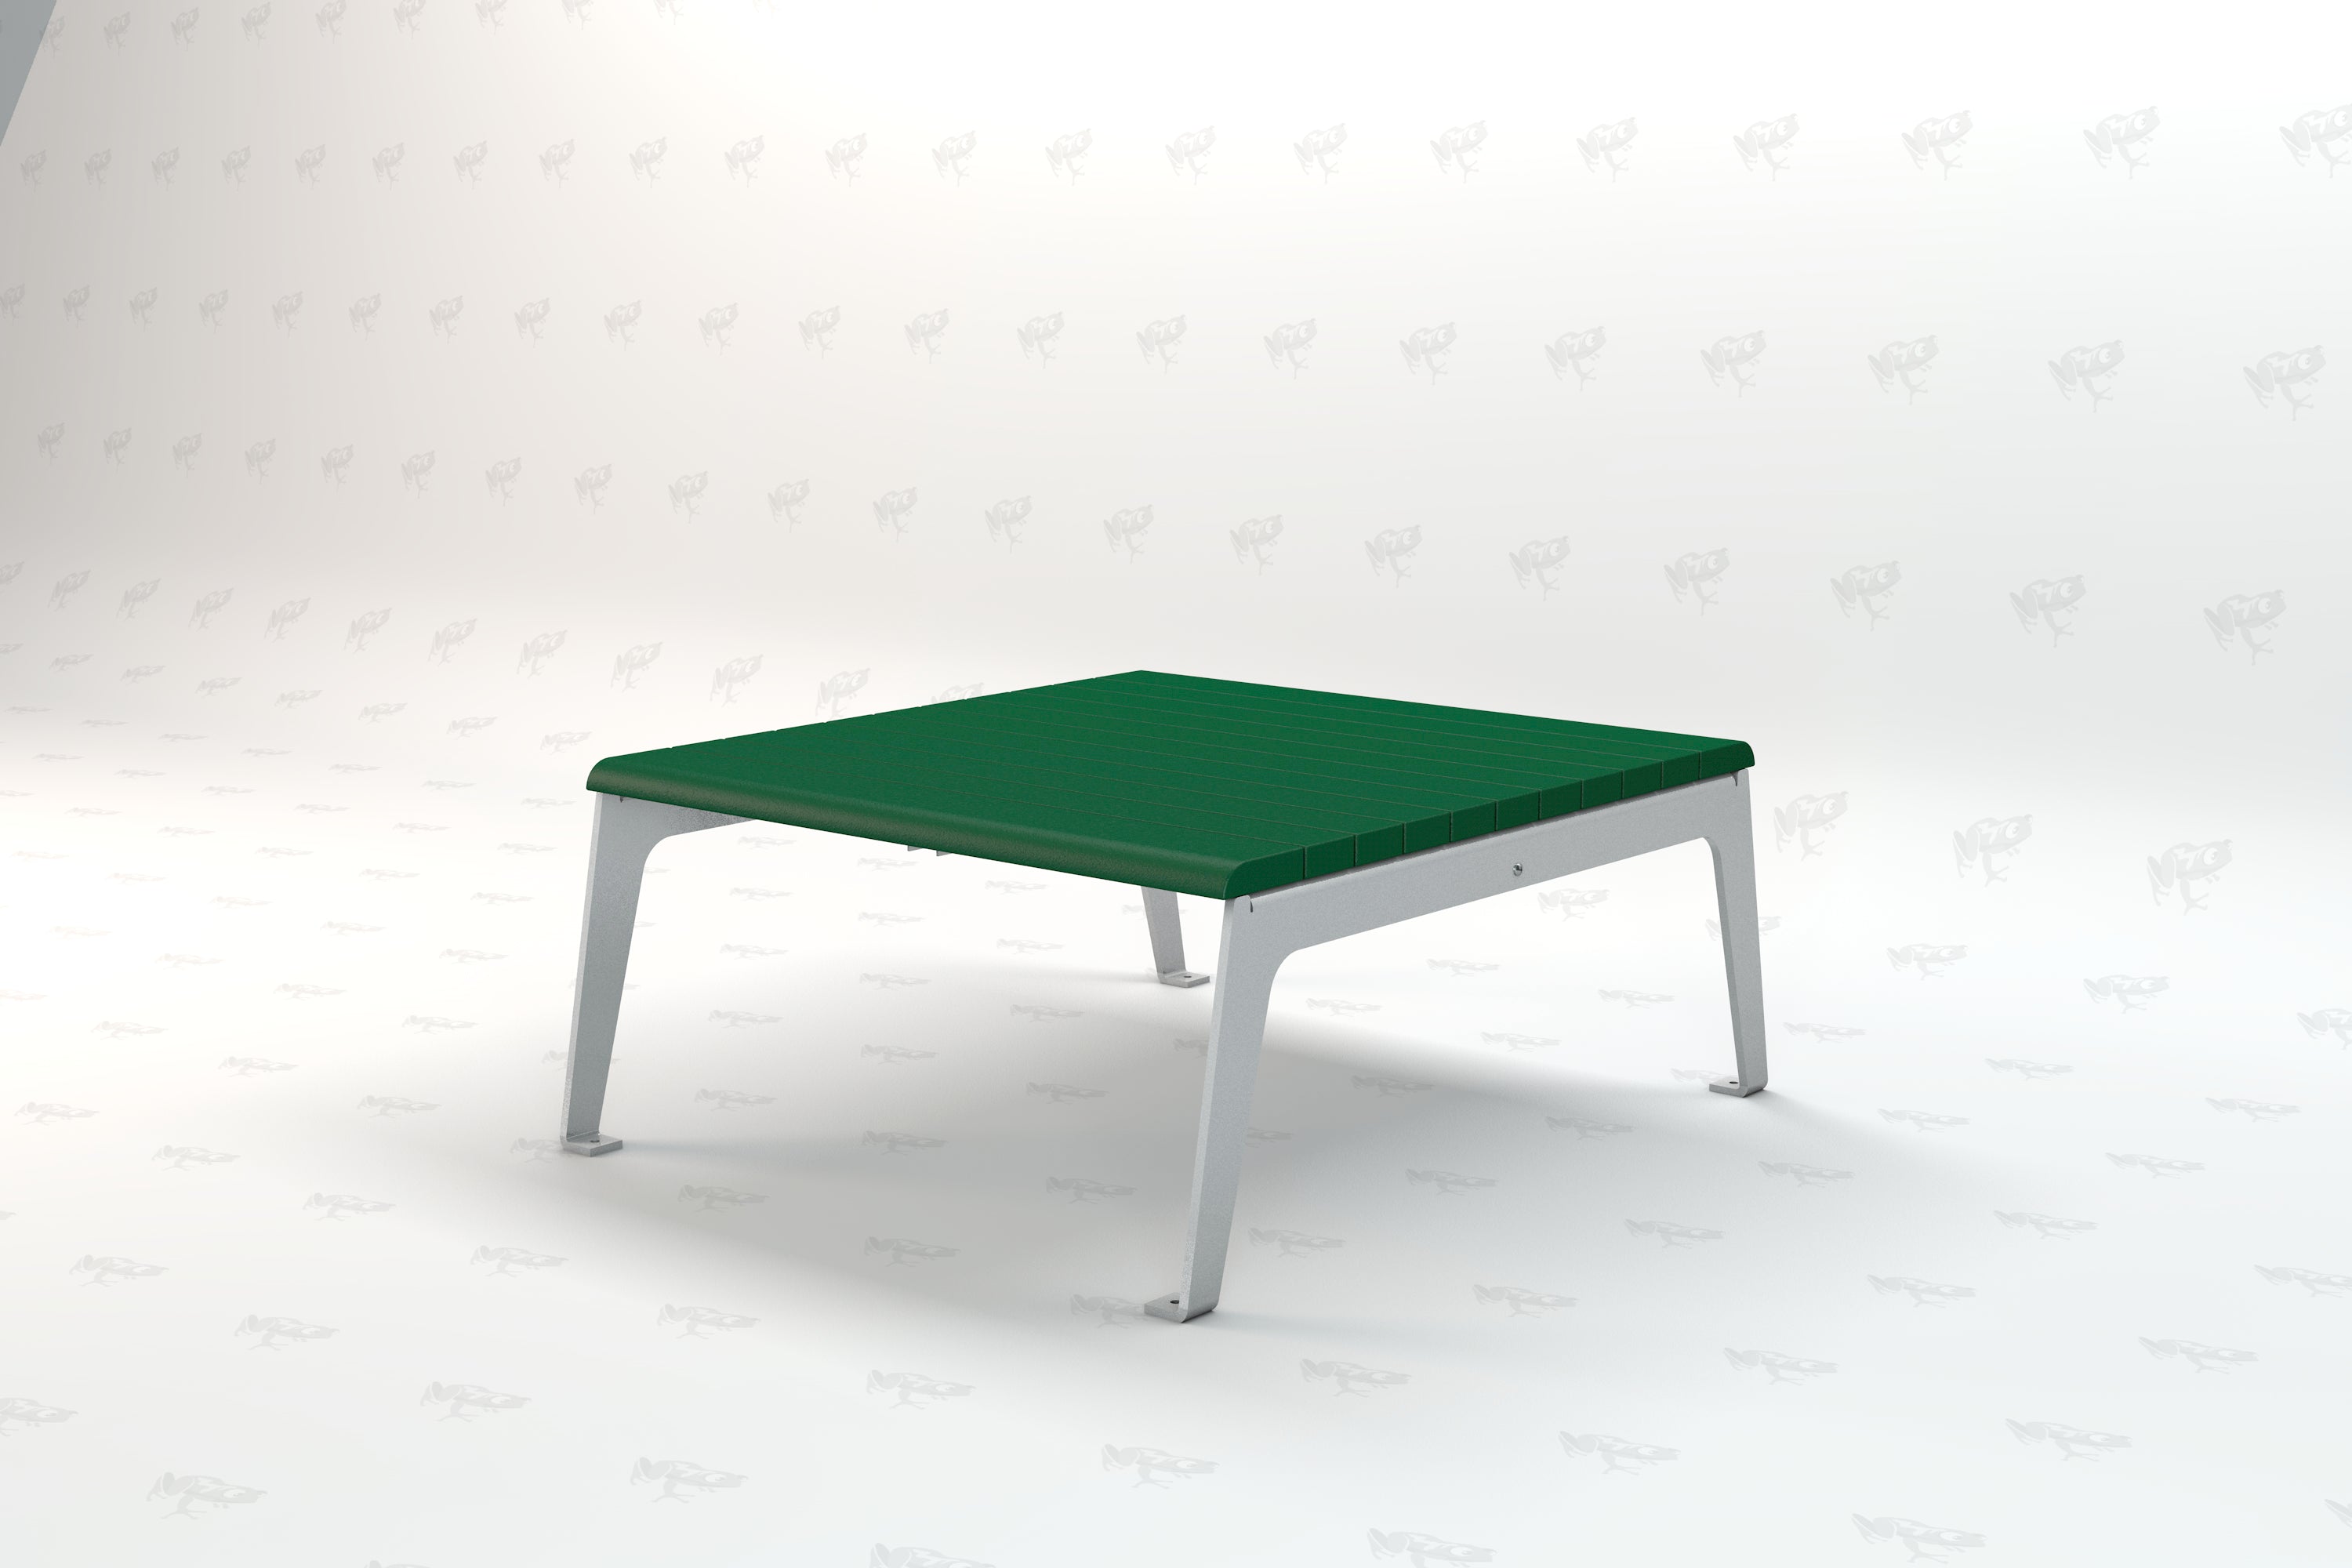 Plaza Recycled Plastic Outdoor Table